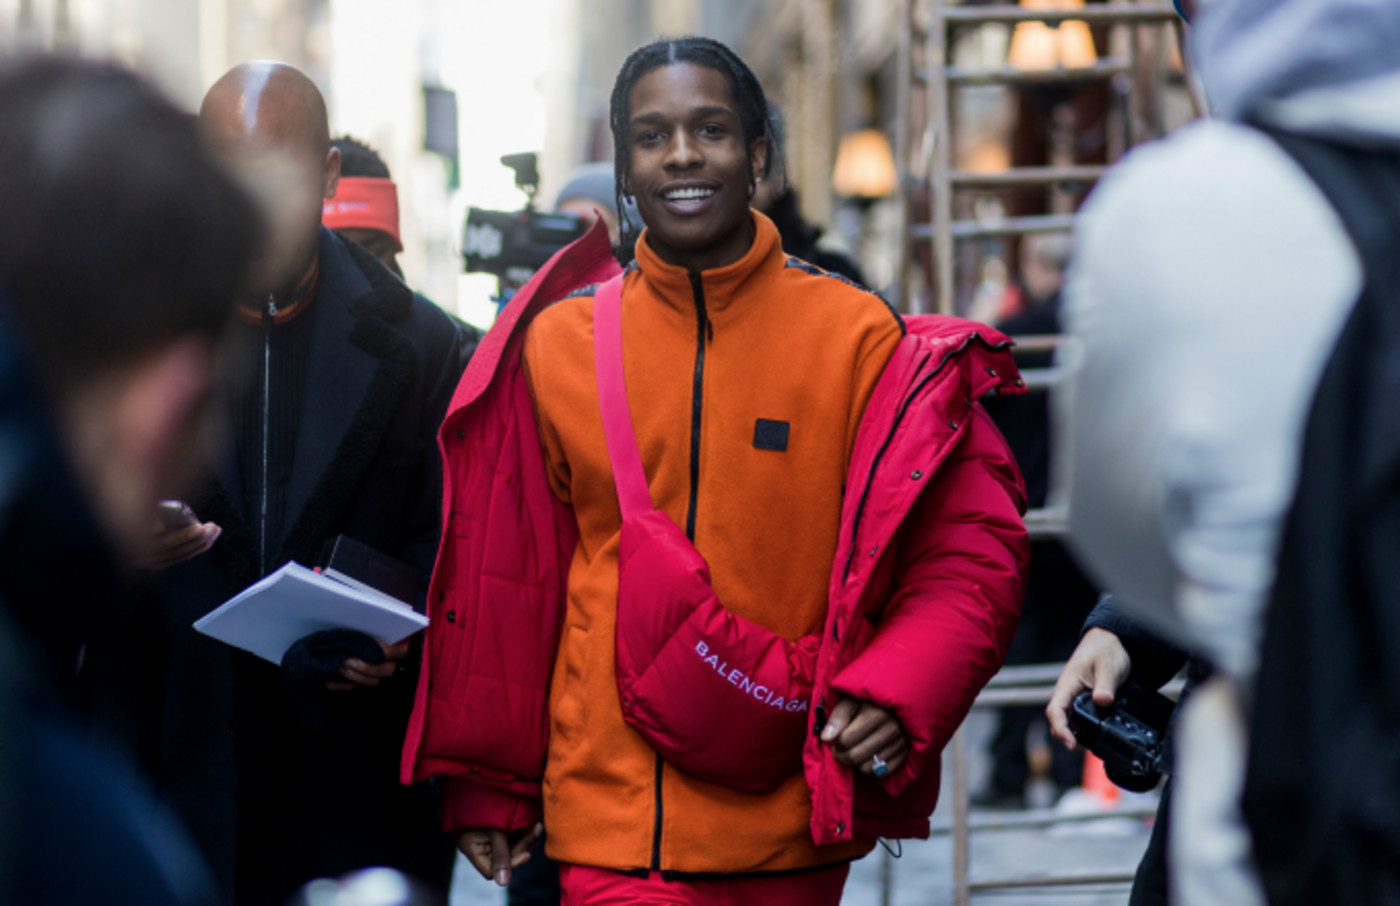 Watch ASAP Rocky Throw Mic After His Set Was Reportedly Cut Short | Complex